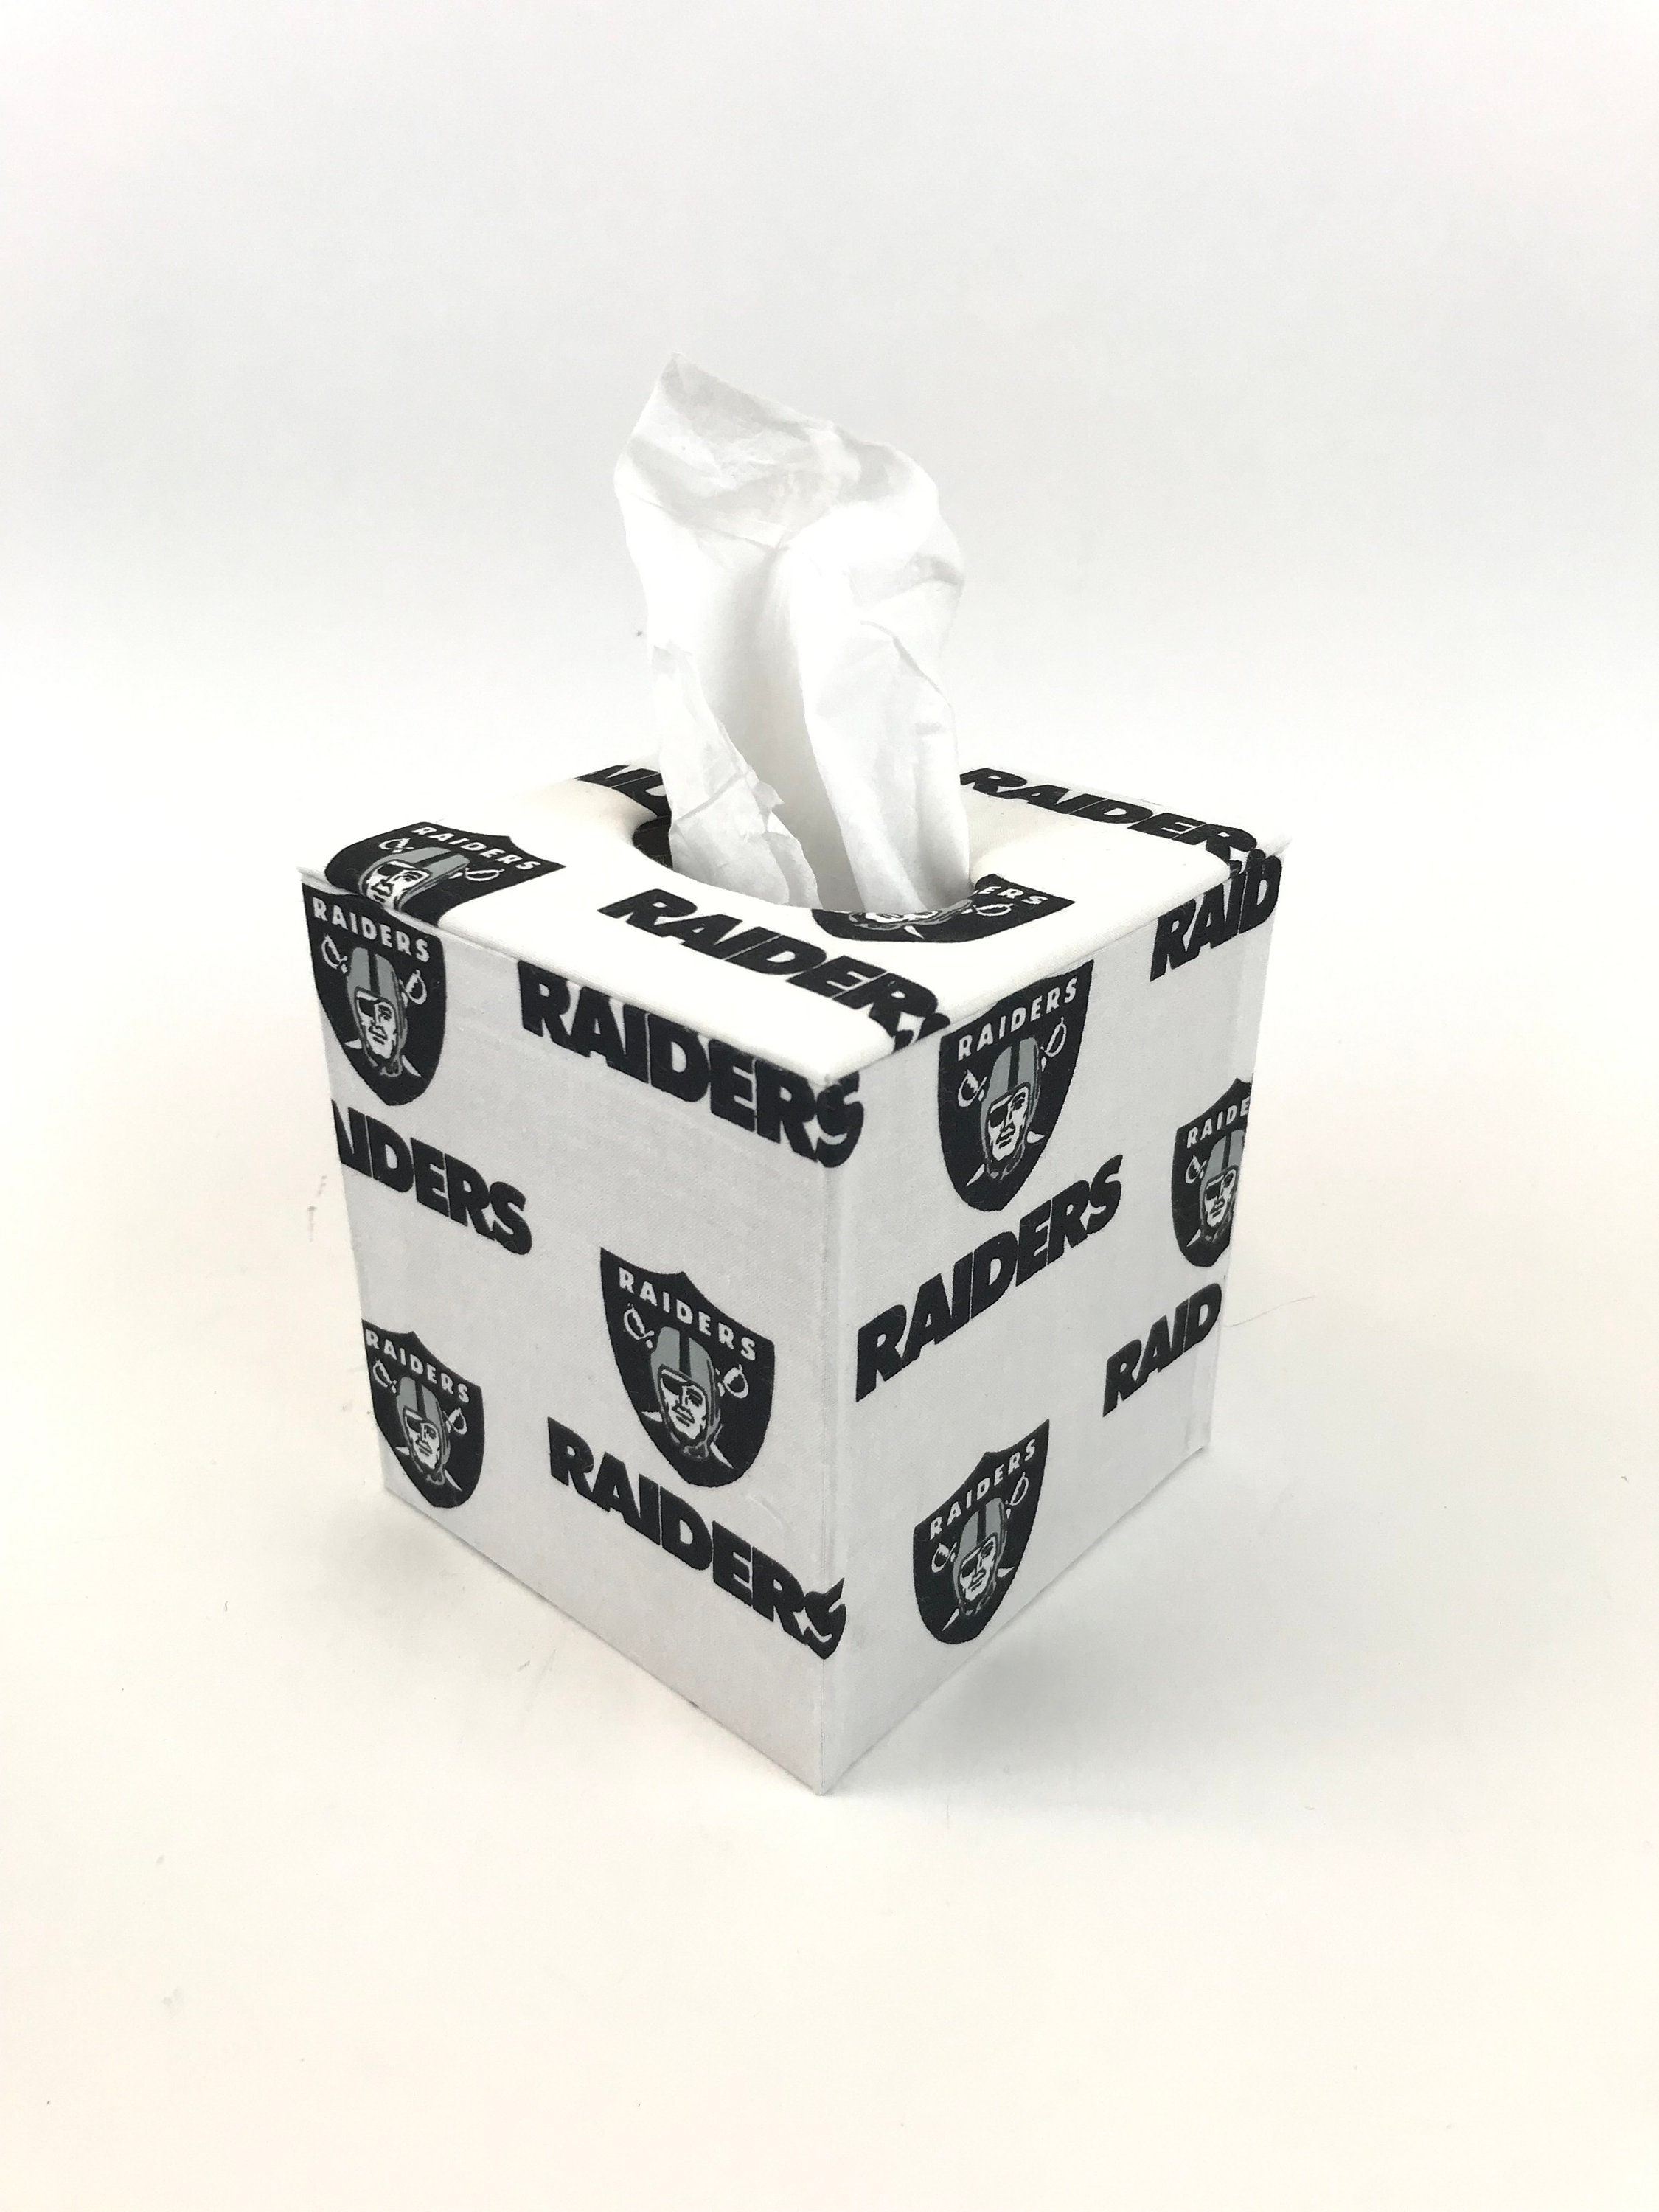 lv raiders wrapping paper